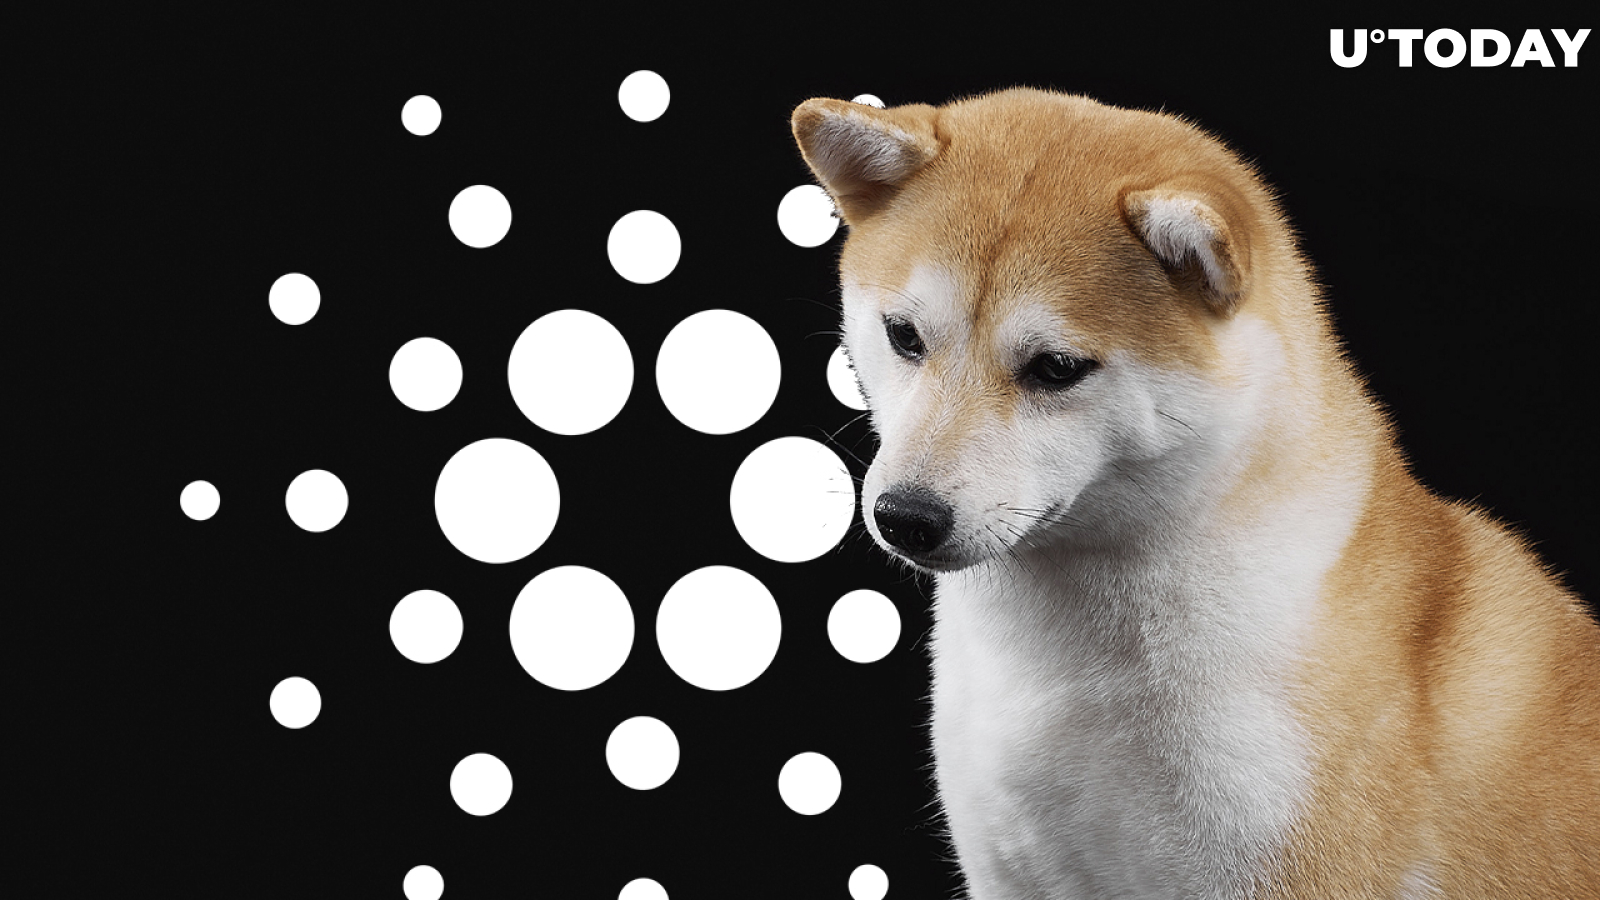 Shiba Inu, Cardano Present Buying Opportunity According to This Indicator